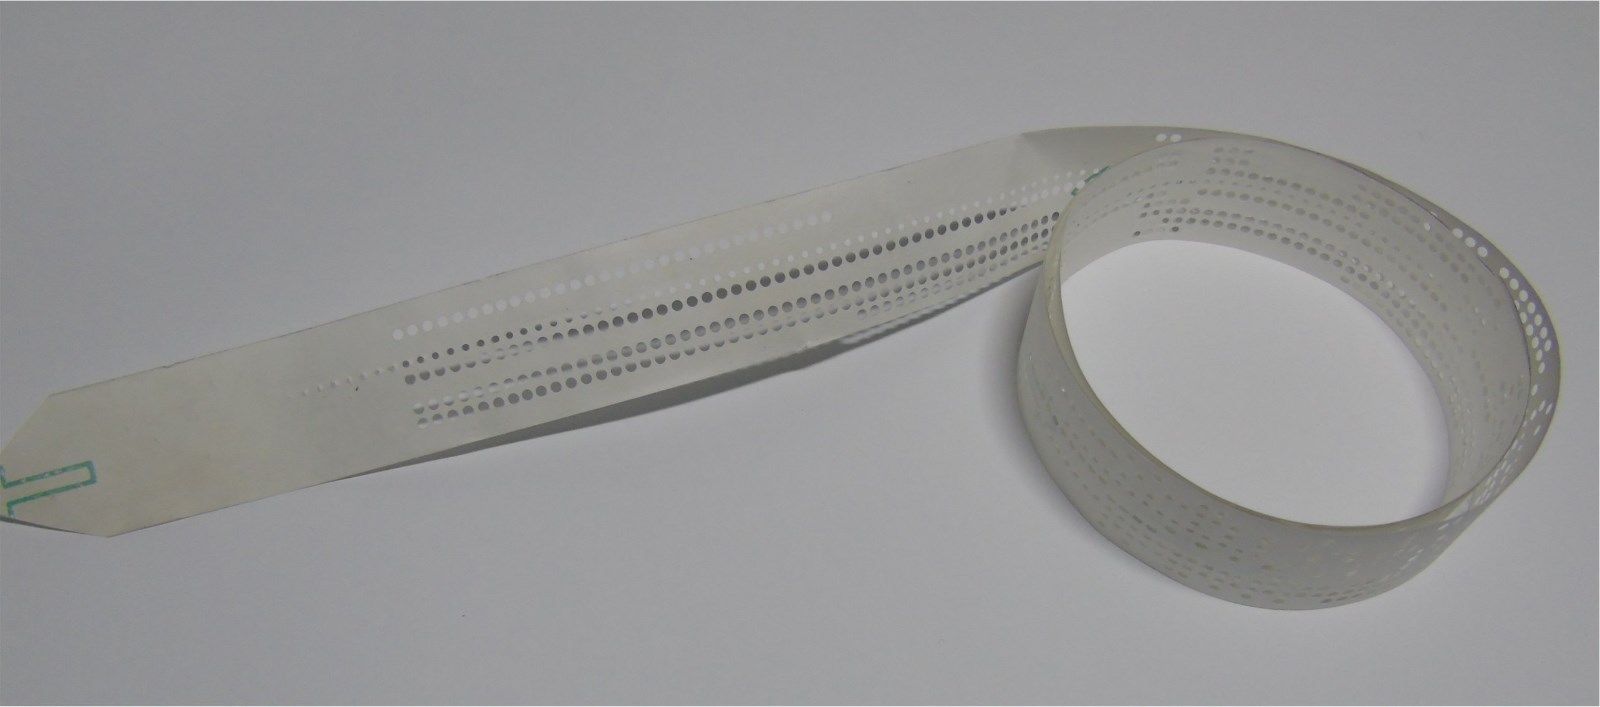 Punched Paper Tape Production Service (price is per multiples of 500 bits)